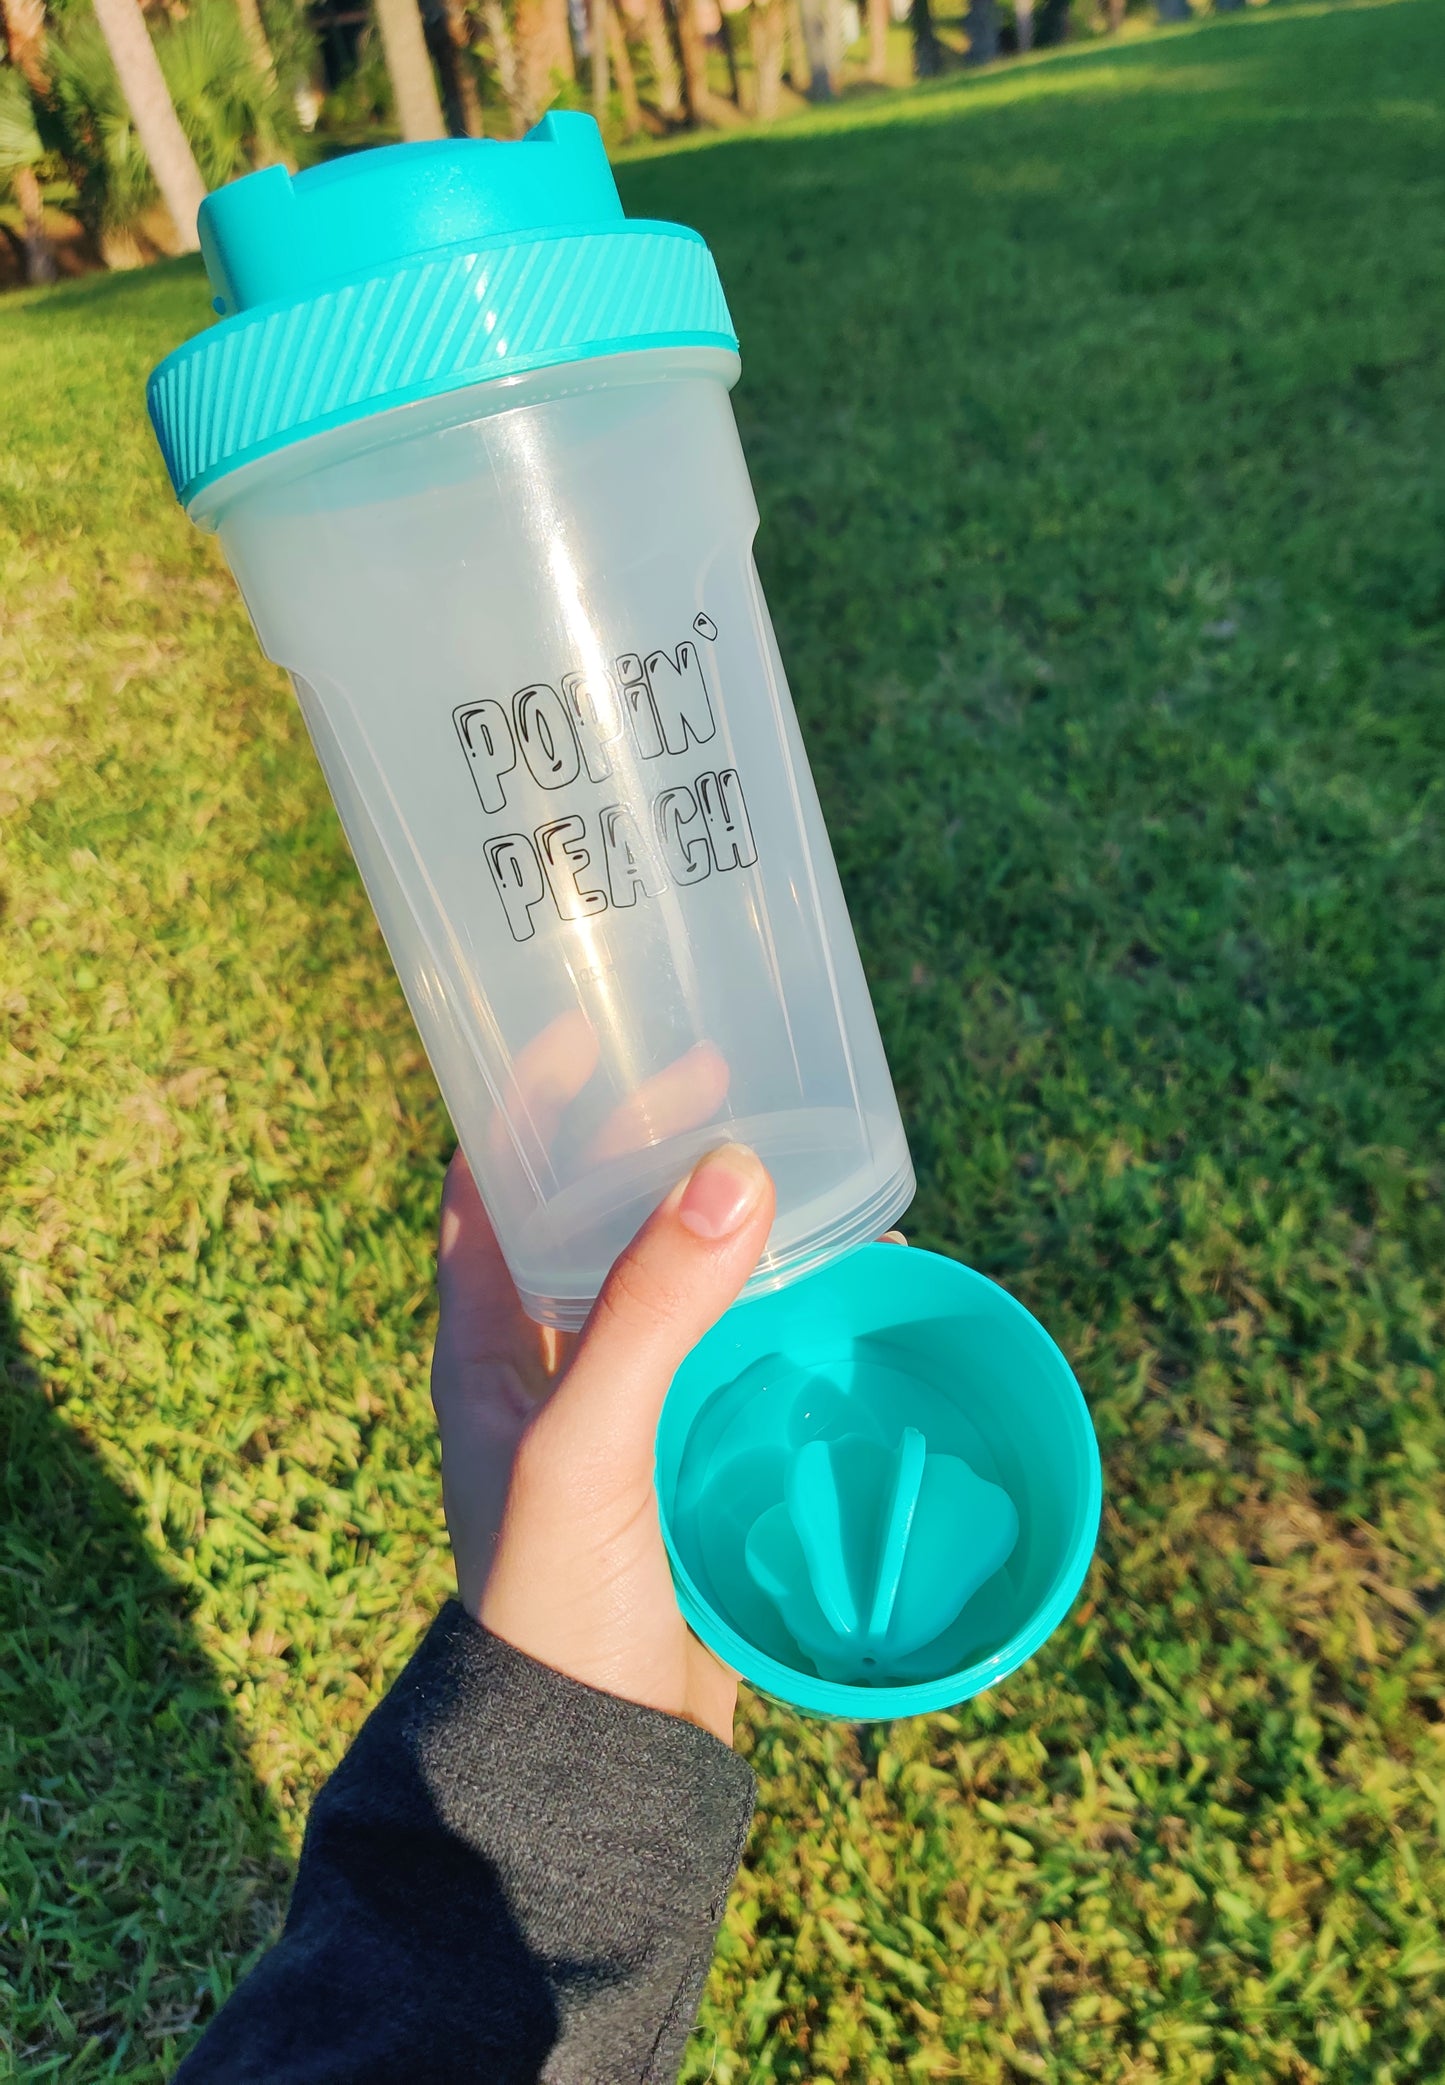 On the go Protein Shaker!